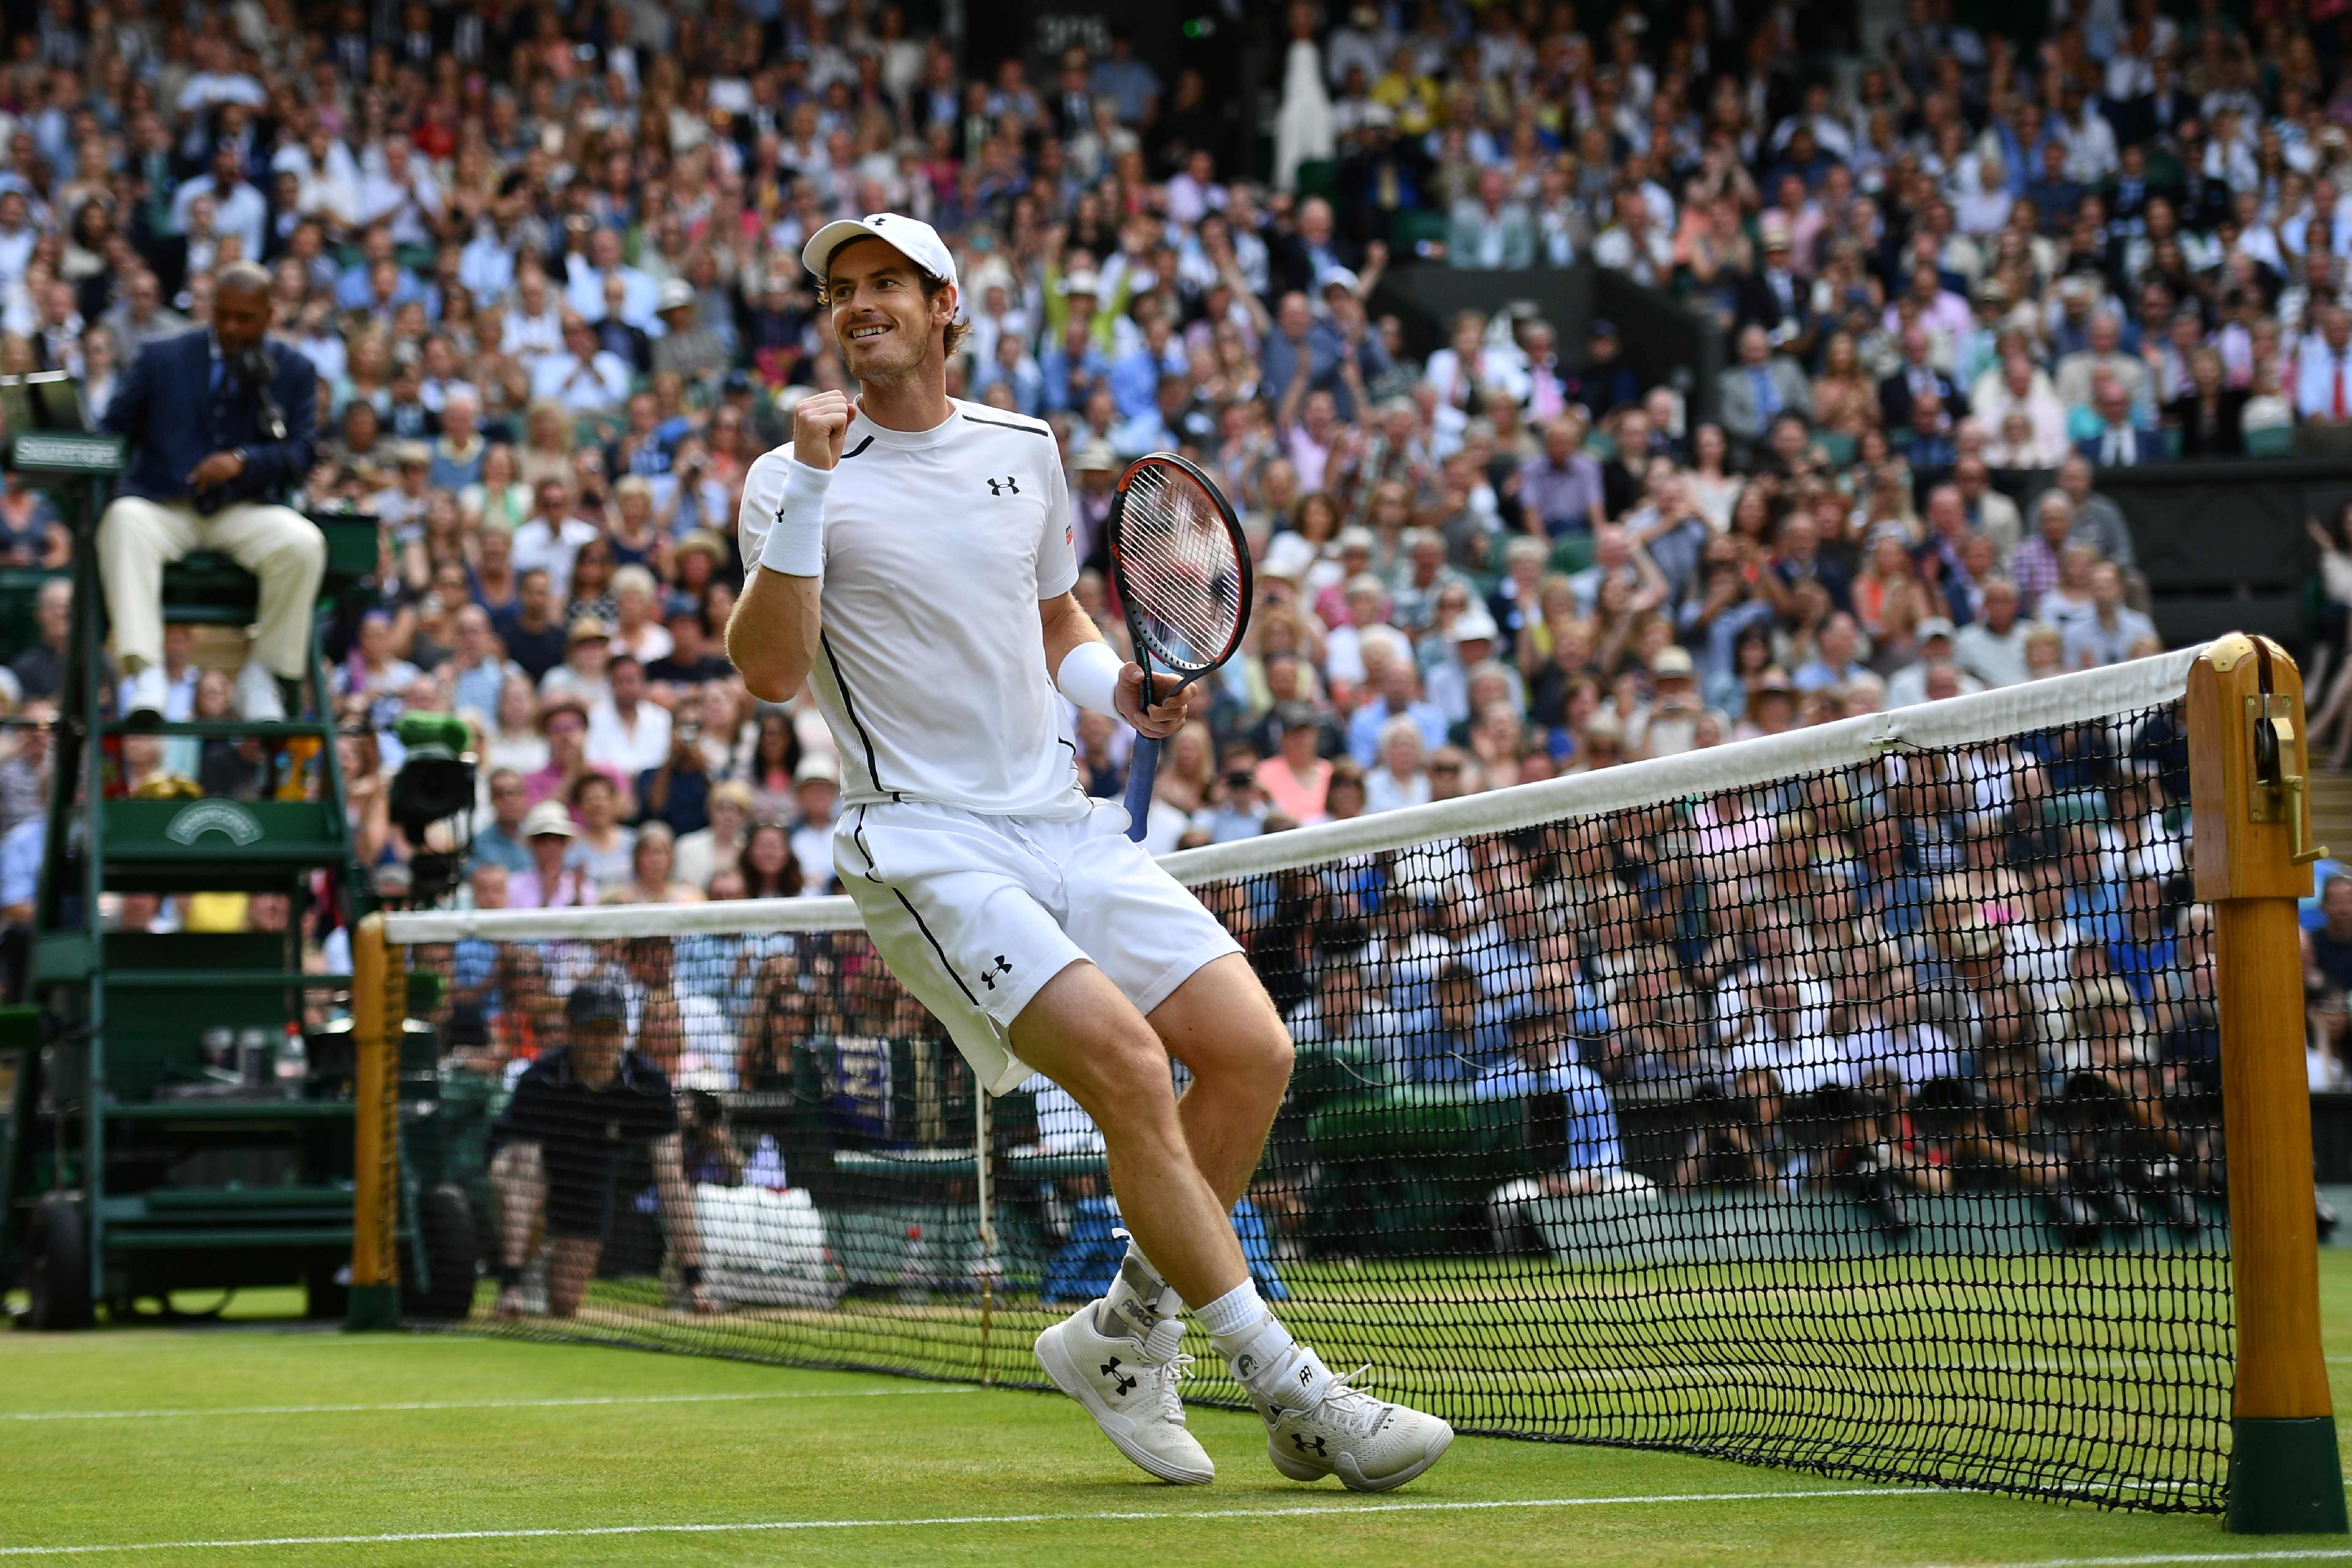 Reliable Murray crushes Berdych to reach Wimbledon final